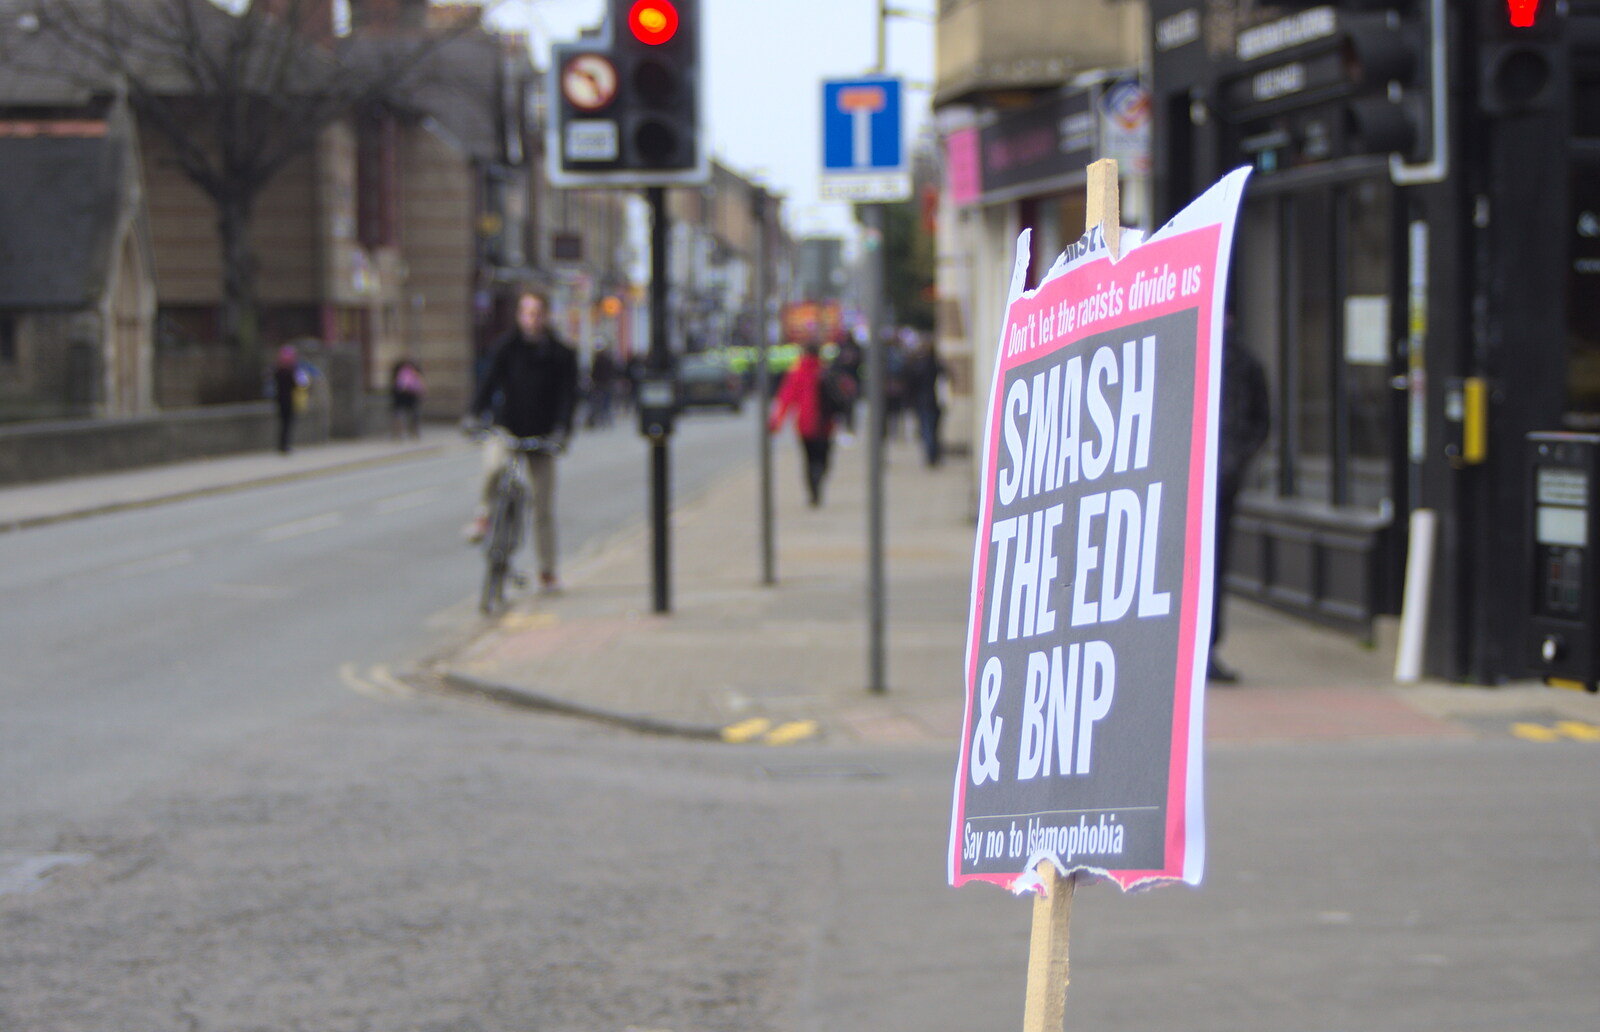 A placard on Mill Road from An Anti-Fascist March, Mill Road, Cambridge - 23rd February 2013